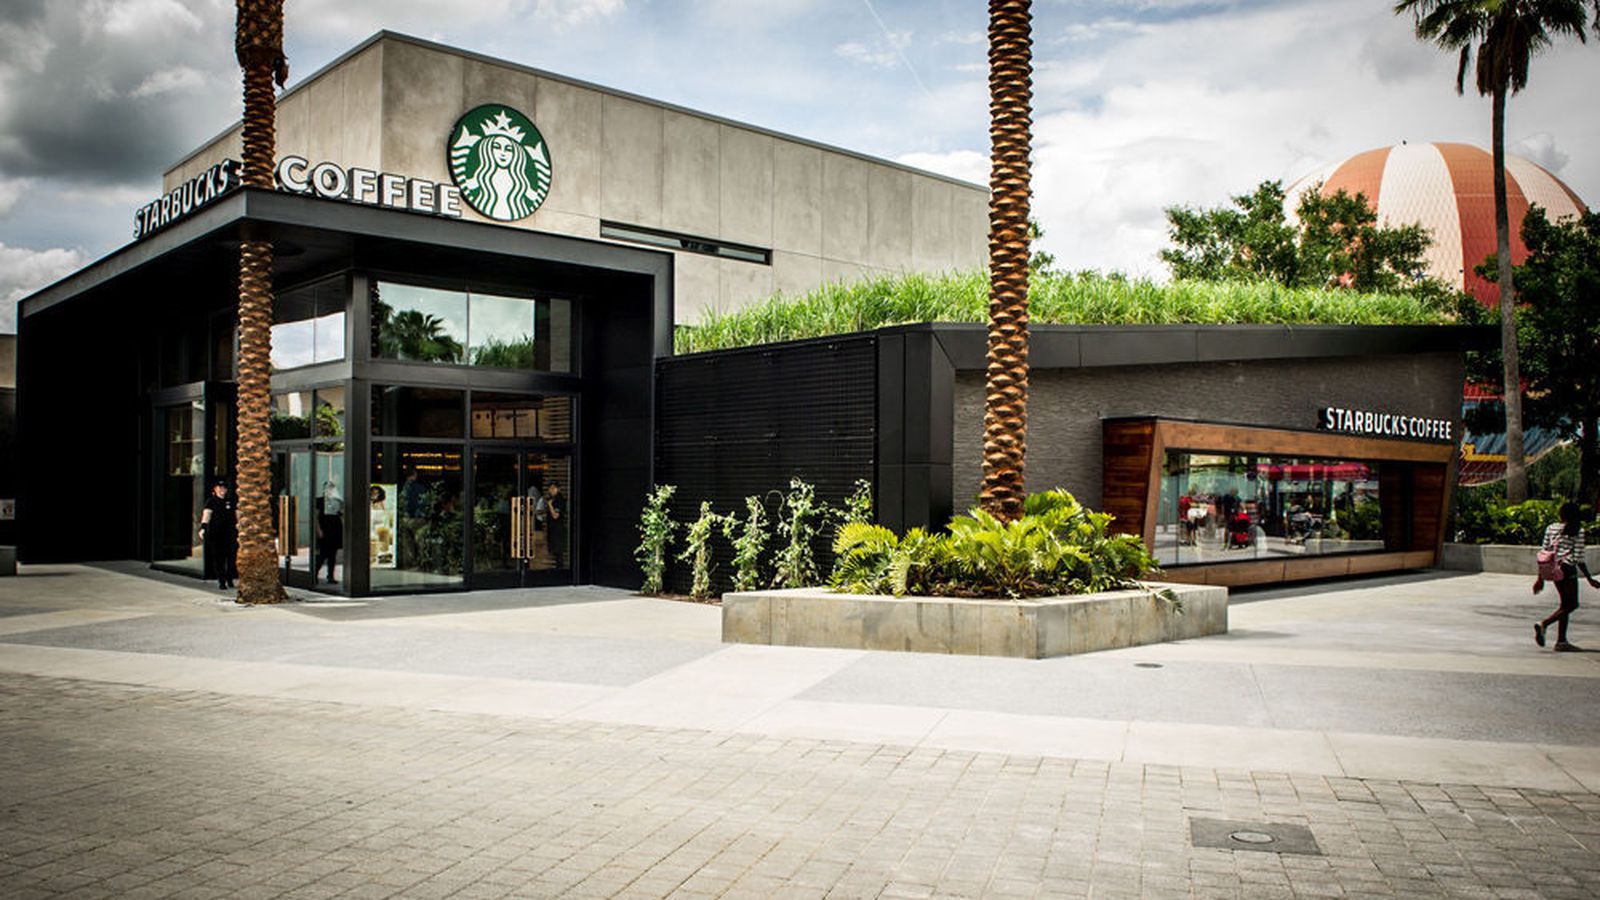 Starbucks Opens Disney World Location with Moss Art and